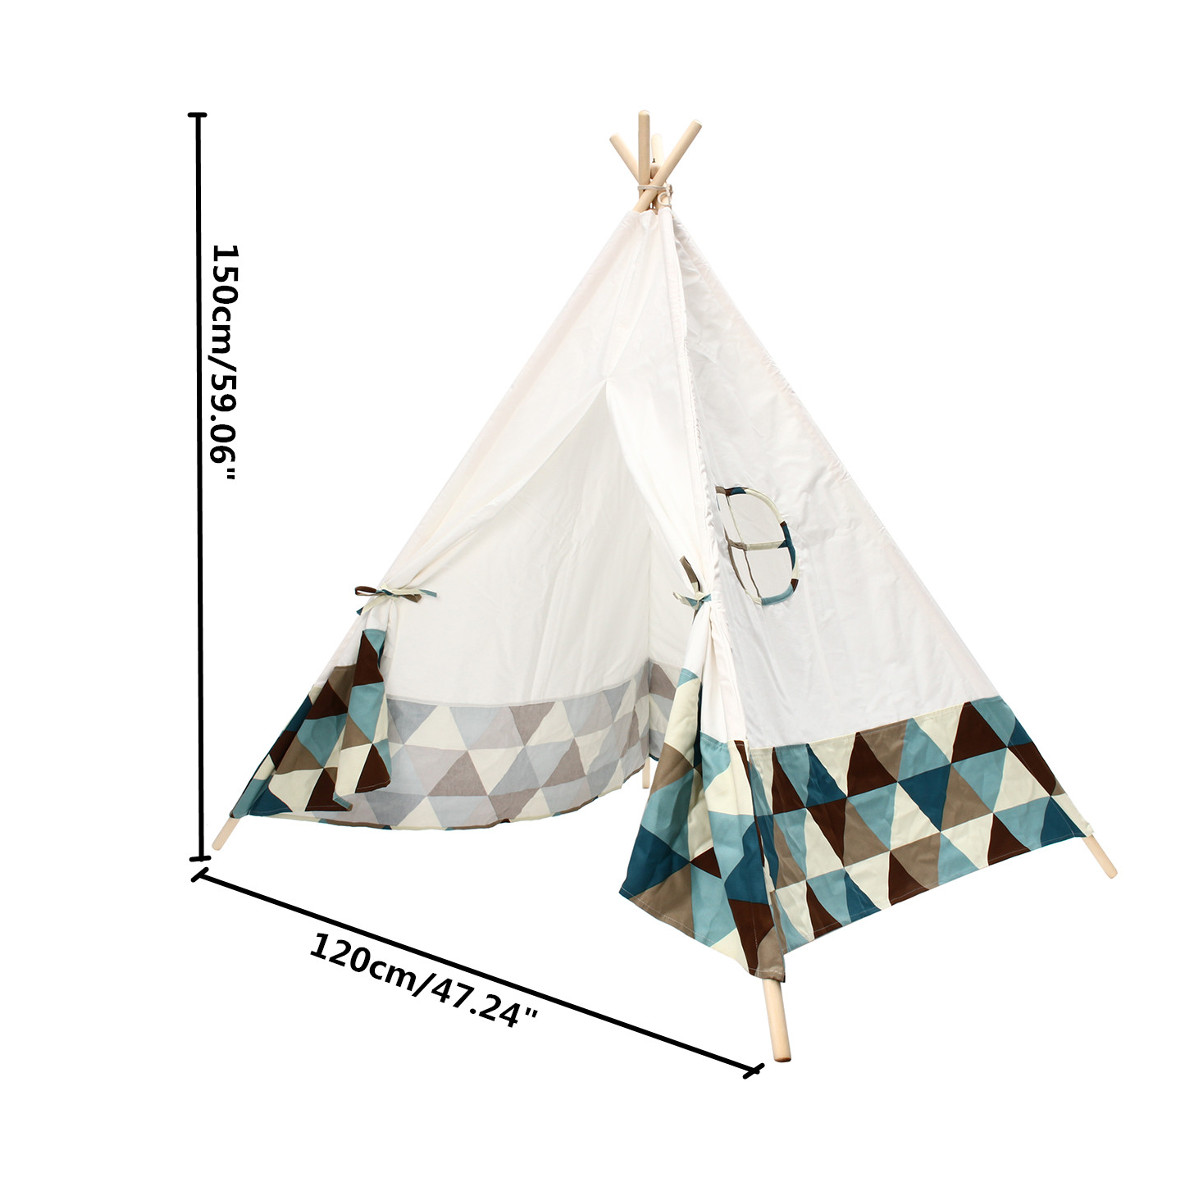 Portable-Kids-Play-Tent-Cotton-Canvas-Playhouse-Children-Sleeping-Playing-Teepee-Indoor-1396724